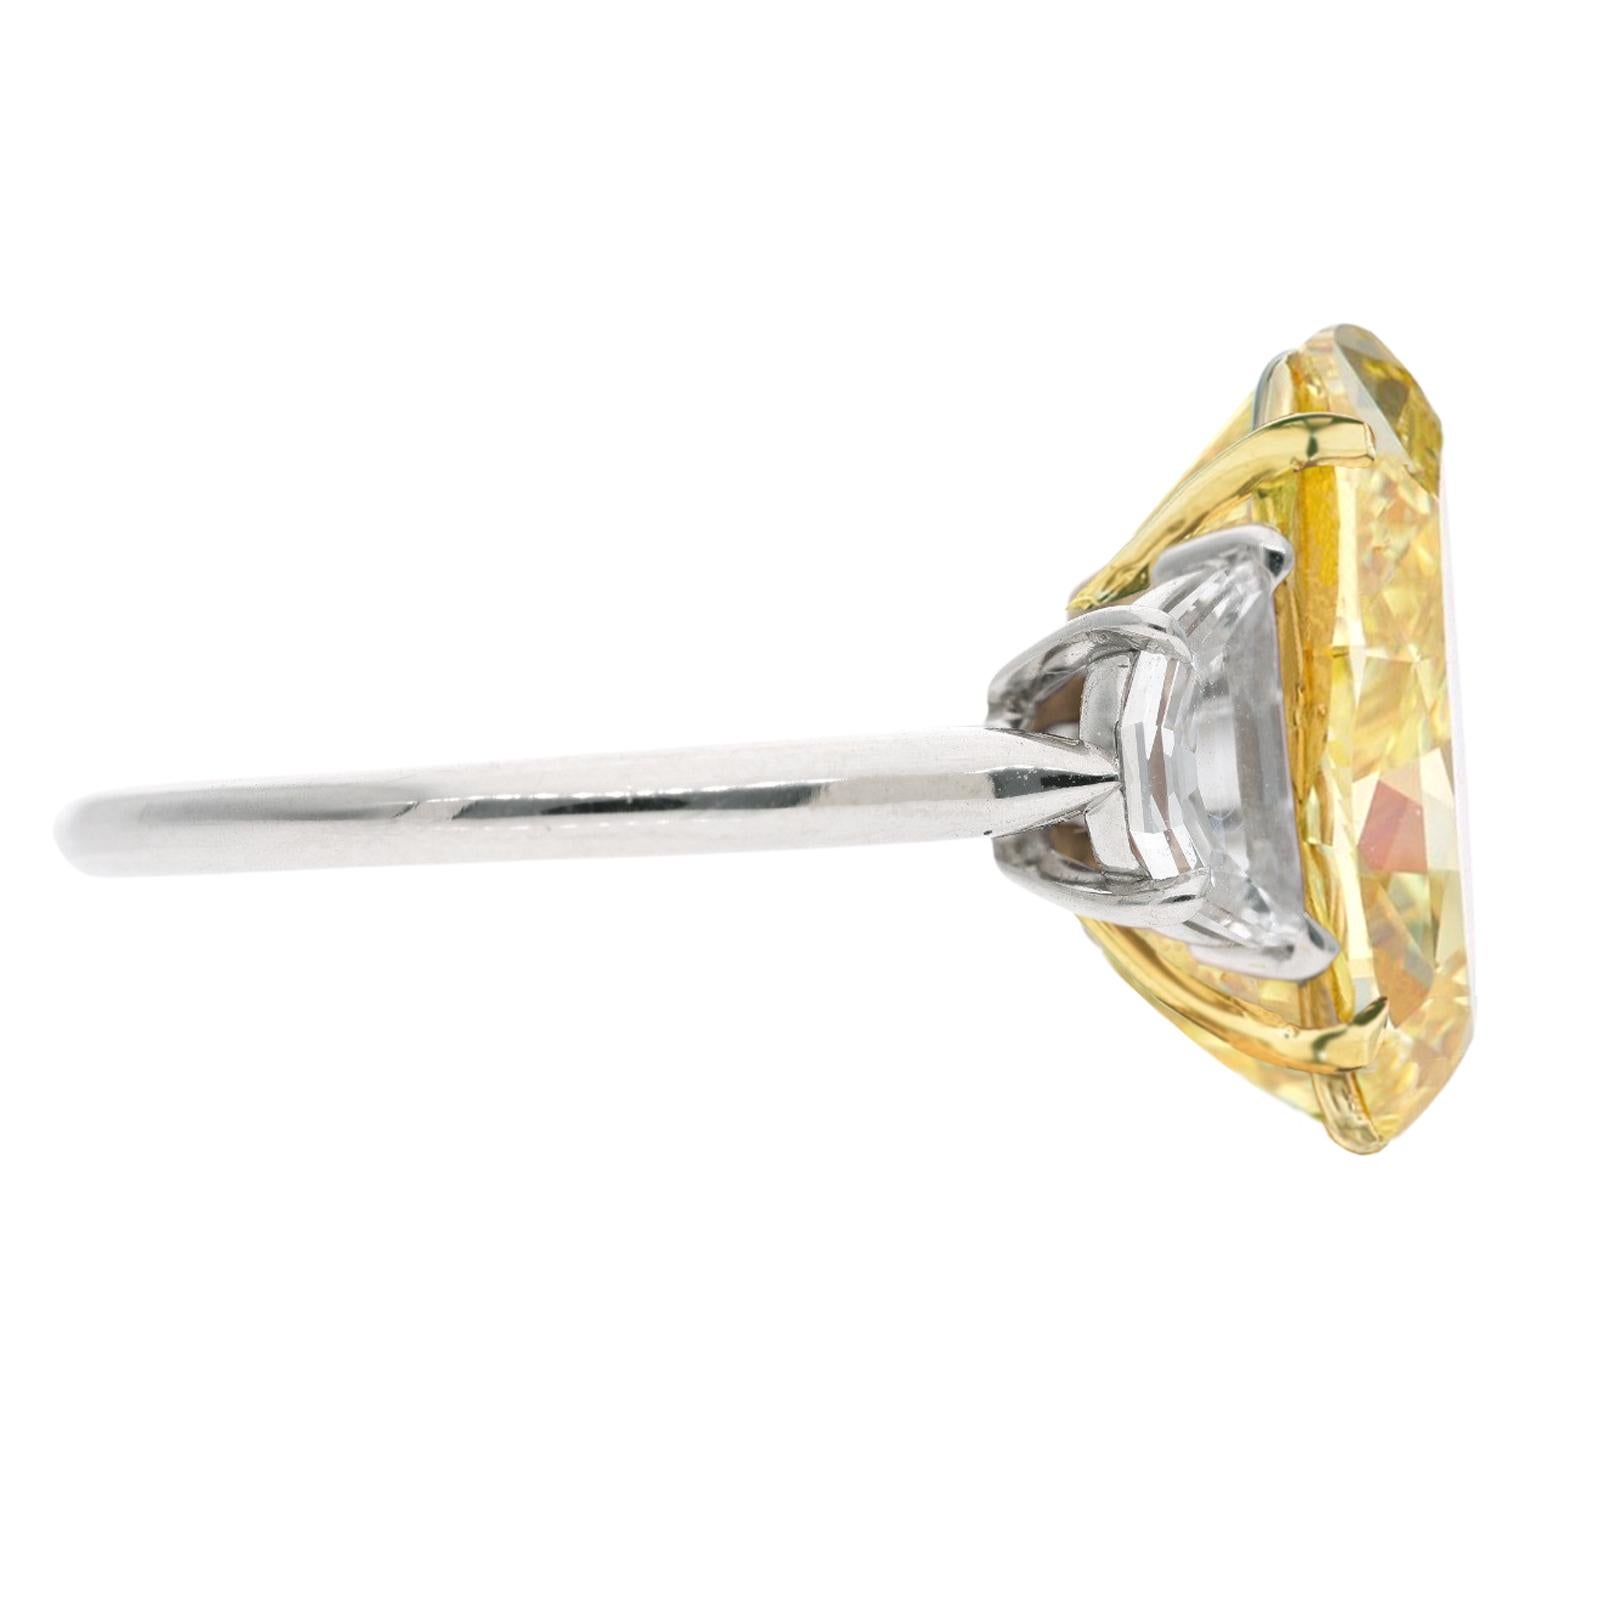 Presenting the exquisite GIA Certified 5.04 Carat Fancy Yellow Oval Cut Platinum Ring, accentuated by a Half Moon Diamond on each side with prong setting in 18K yellow gold. At the center of this magnificent ring shines a captivating fancy yellow